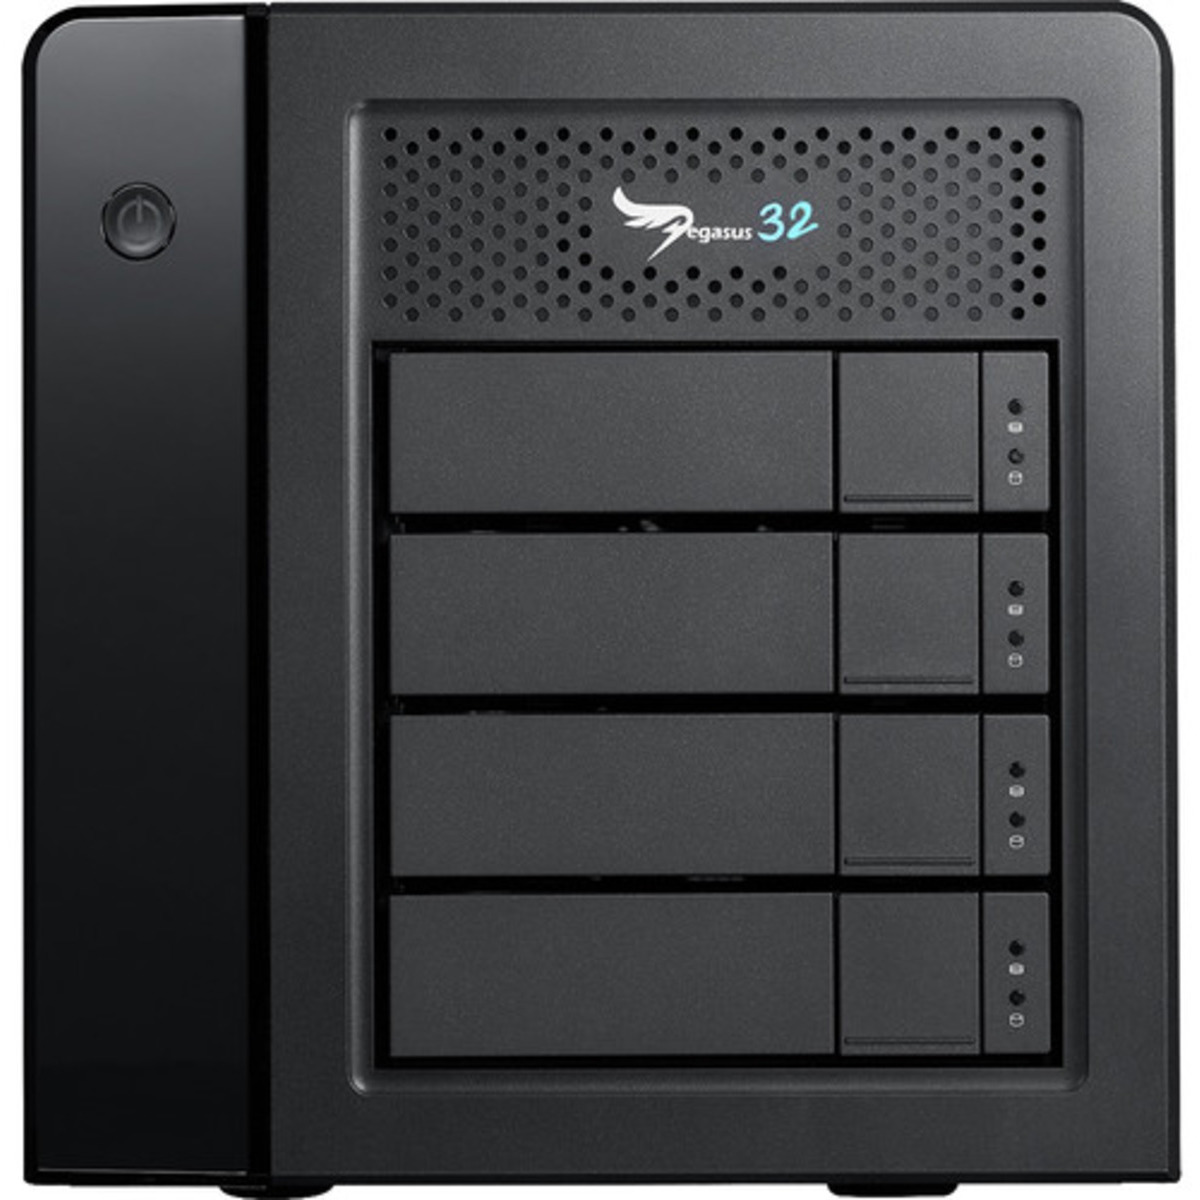 Promise Technology Pegasus32 R4 Thunderbolt 3 24tb 4-Bay Desktop Multimedia / Power User / Business DAS - Direct Attached Storage Device 4x6tb Western Digital Red WD60EFAX 3.5 5400rpm SATA 6Gb/s HDD NAS Class Drives Installed - Burn-In Tested Pegasus32 R4 Thunderbolt 3